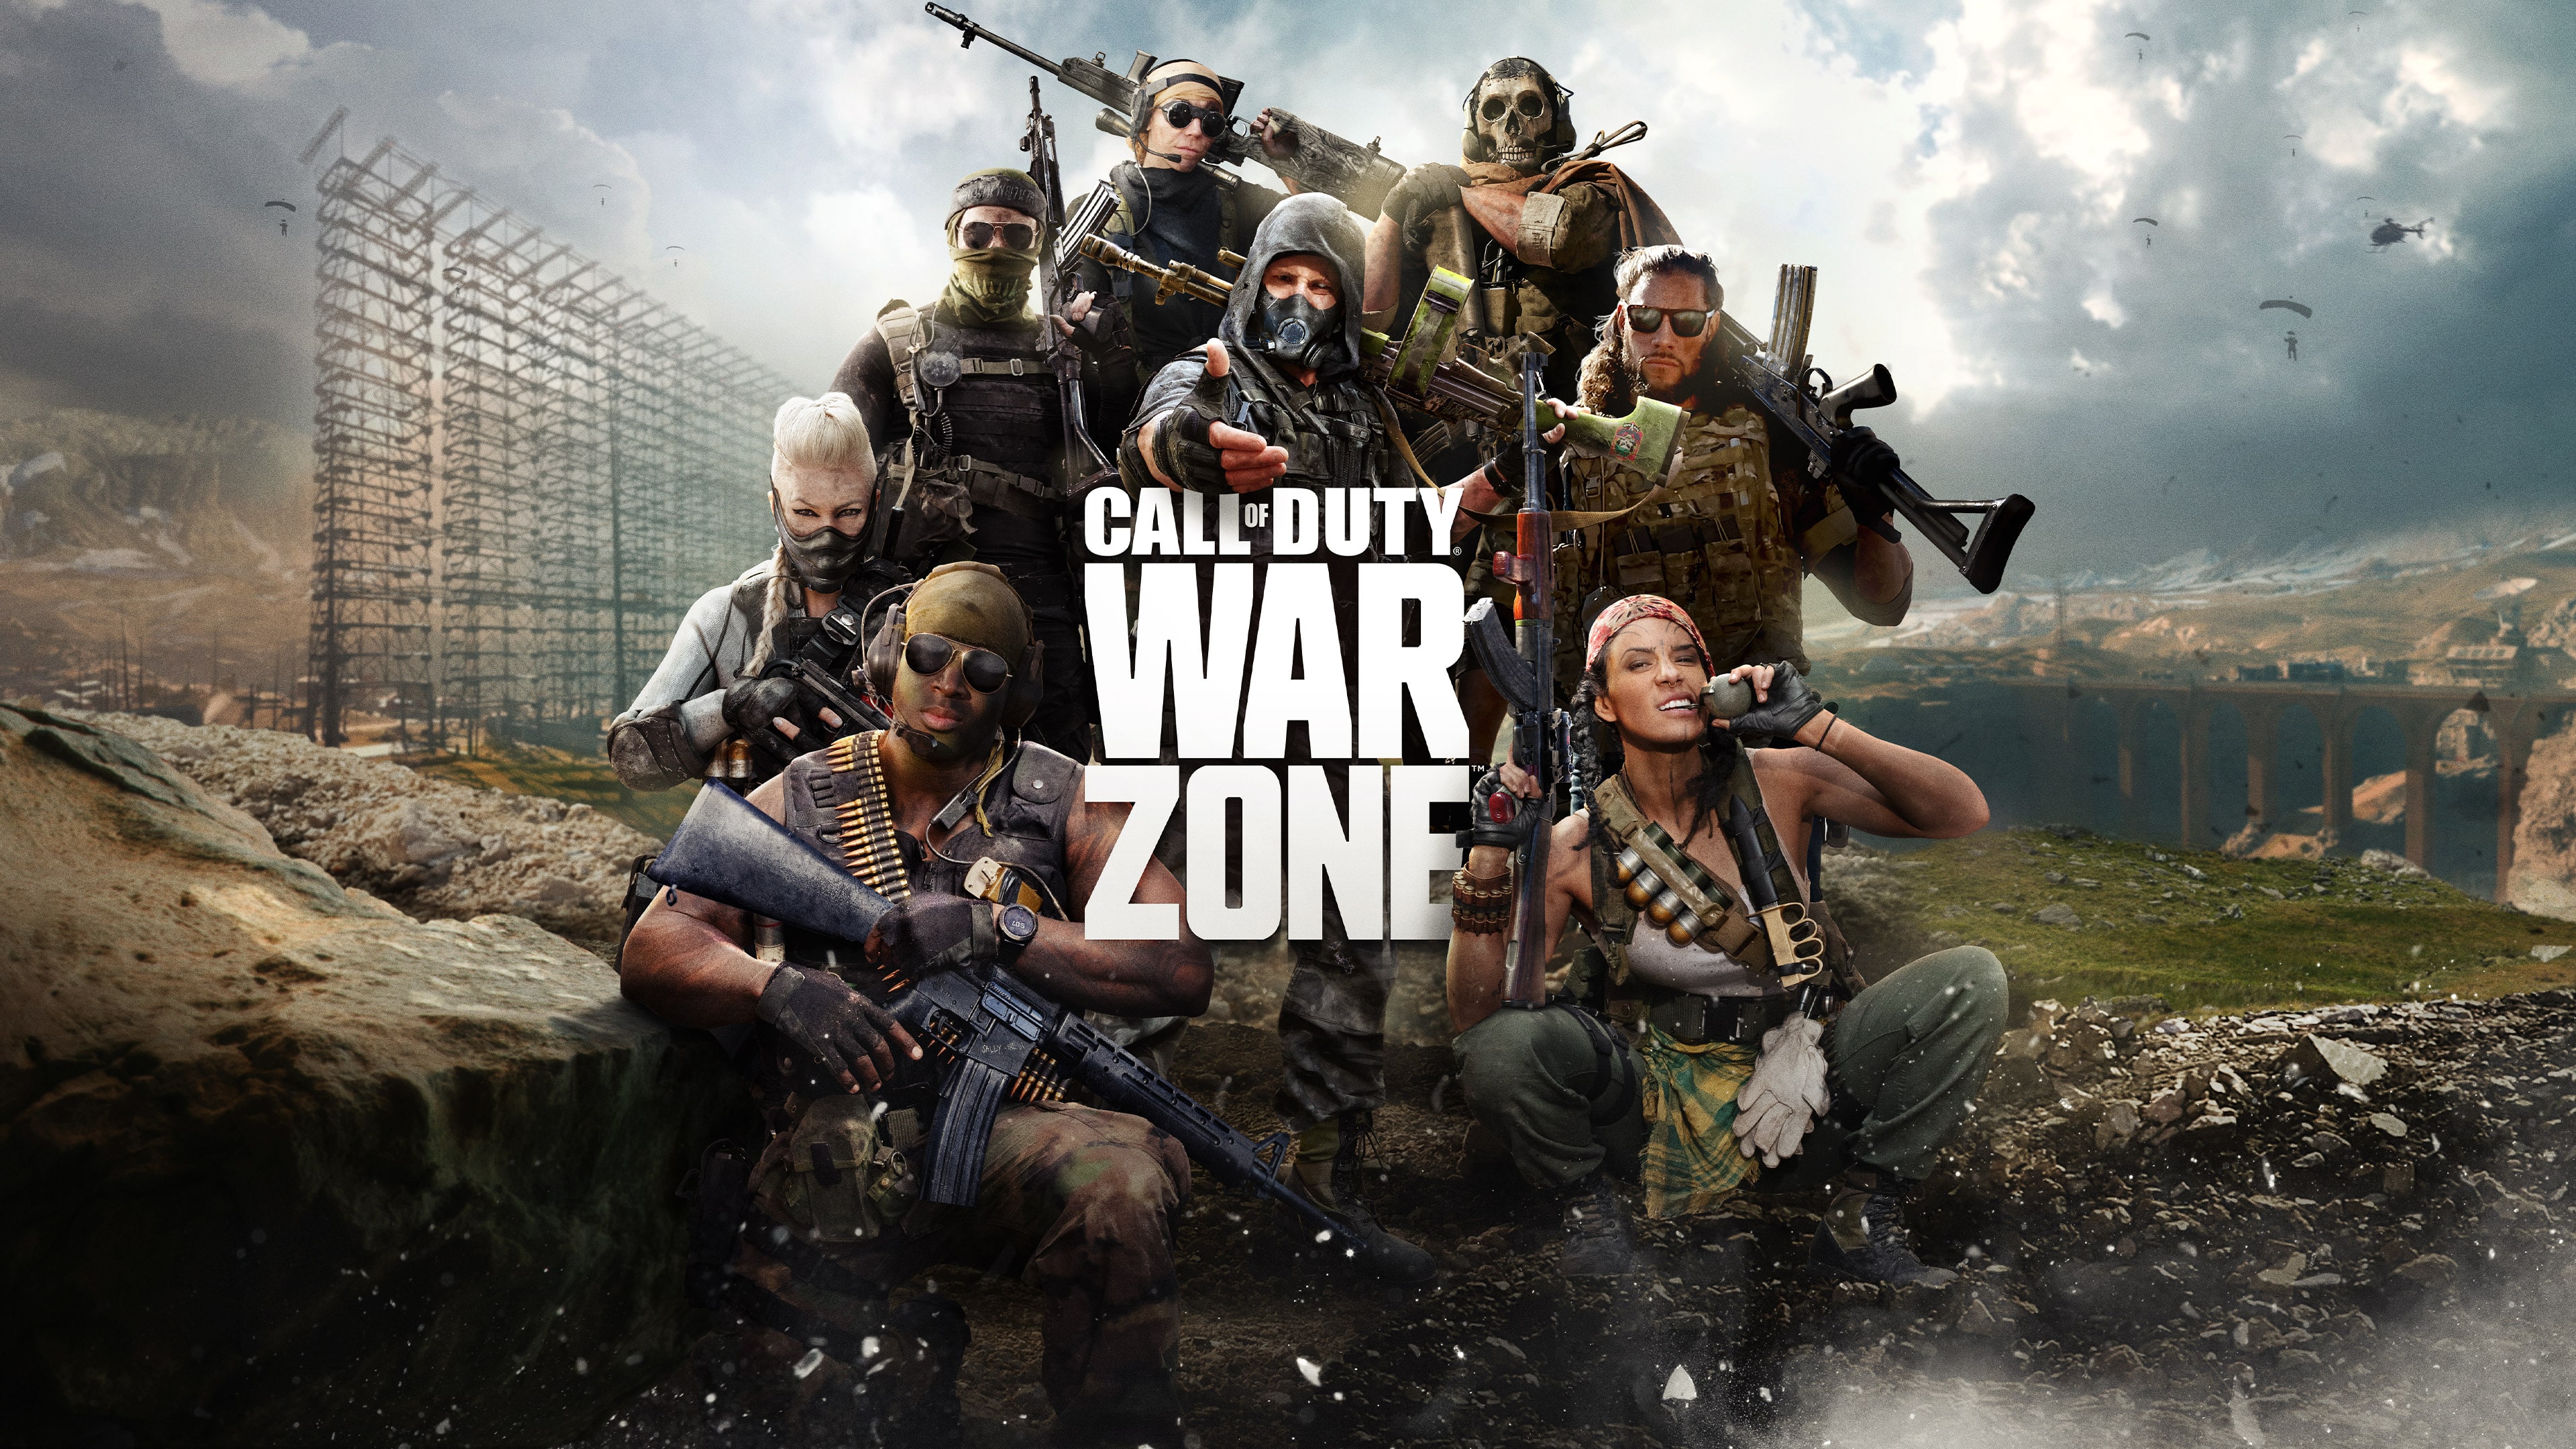 Релиз call of duty warzone mobile. Рамка легенды Call of Duty. Last Call игра. Warzone last Stand.